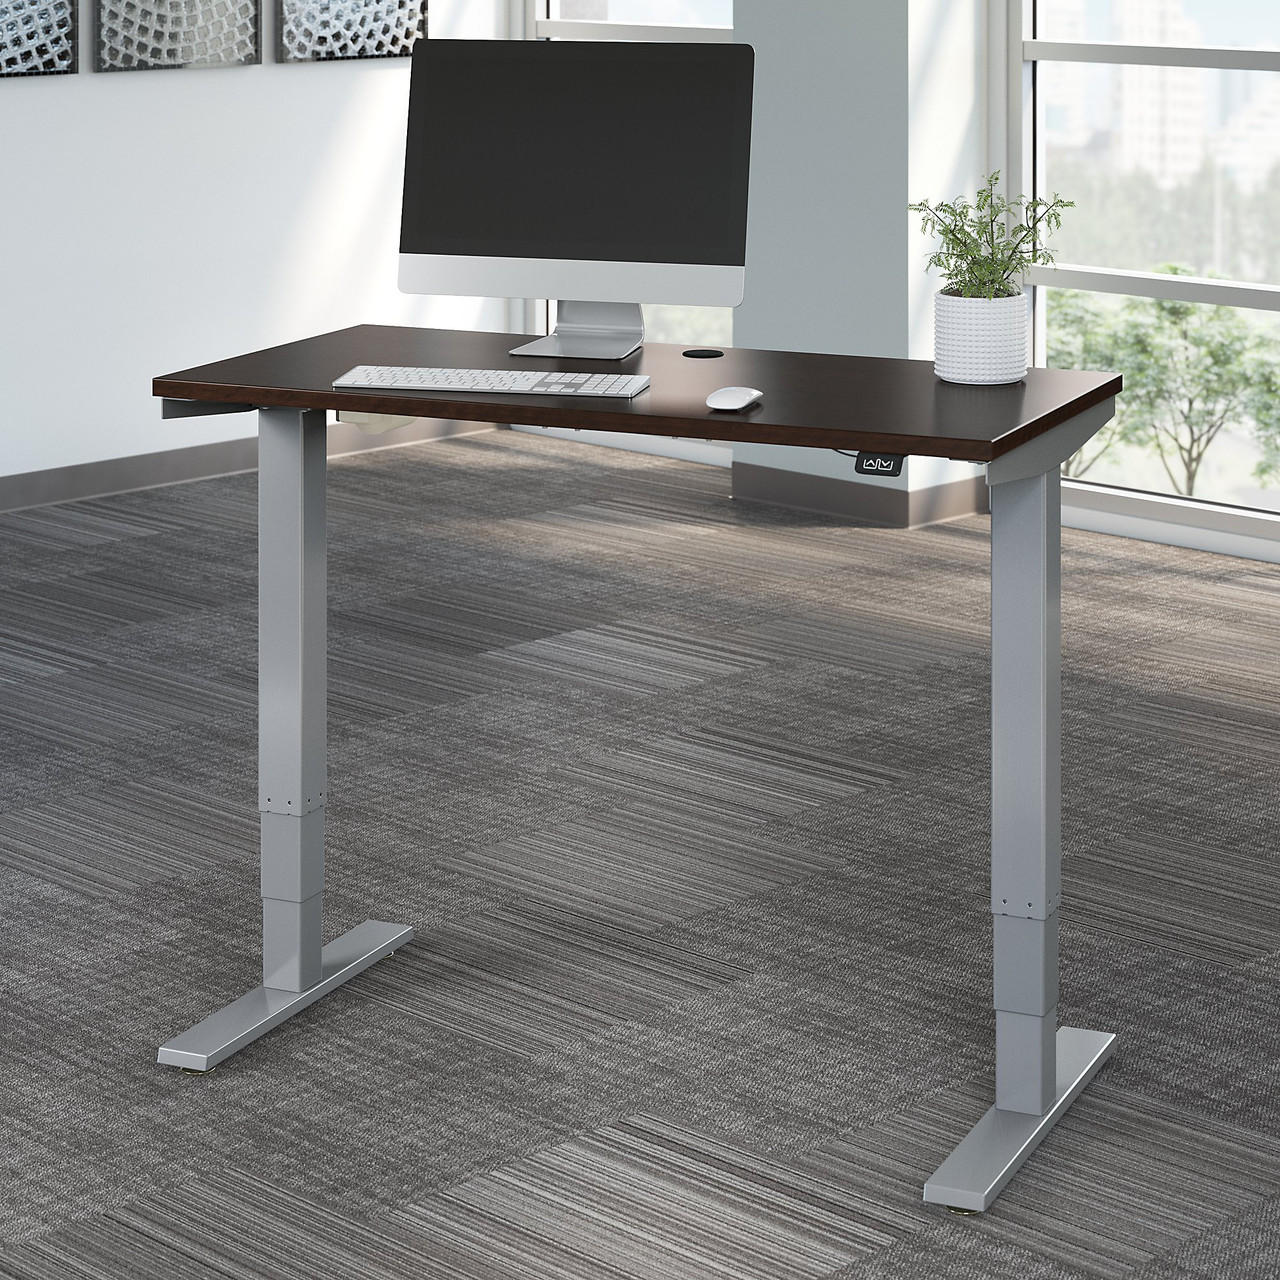 Bush Business Furniture Move 40 Series by Bush Business Furniture 48W x 24D Height Adjustable Standing Desk 